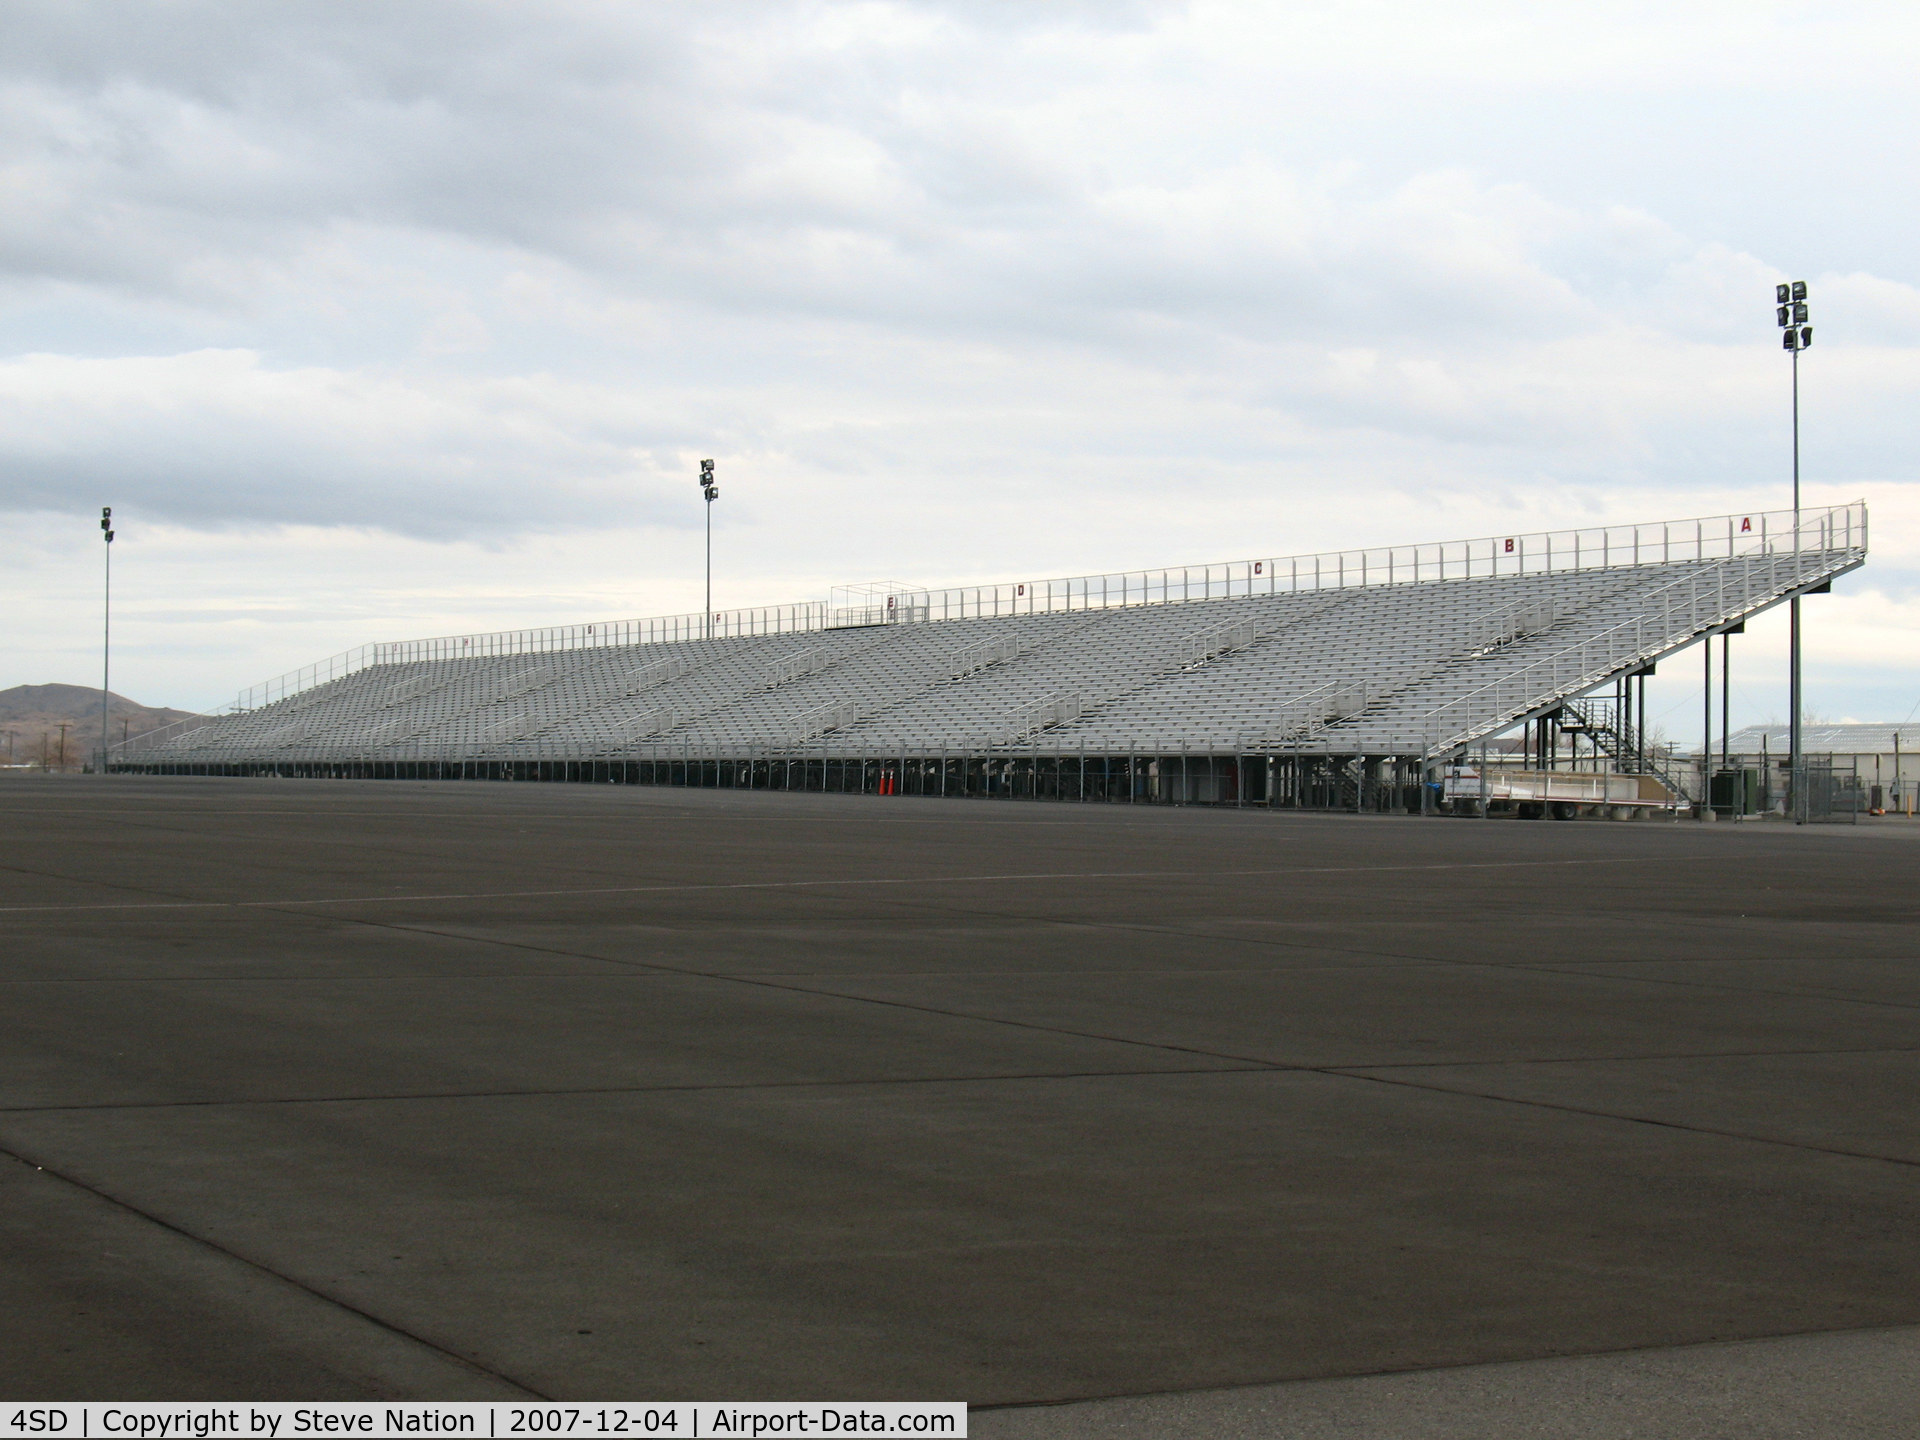 4SD Airport - National Air Race grandstand (no crowds!)